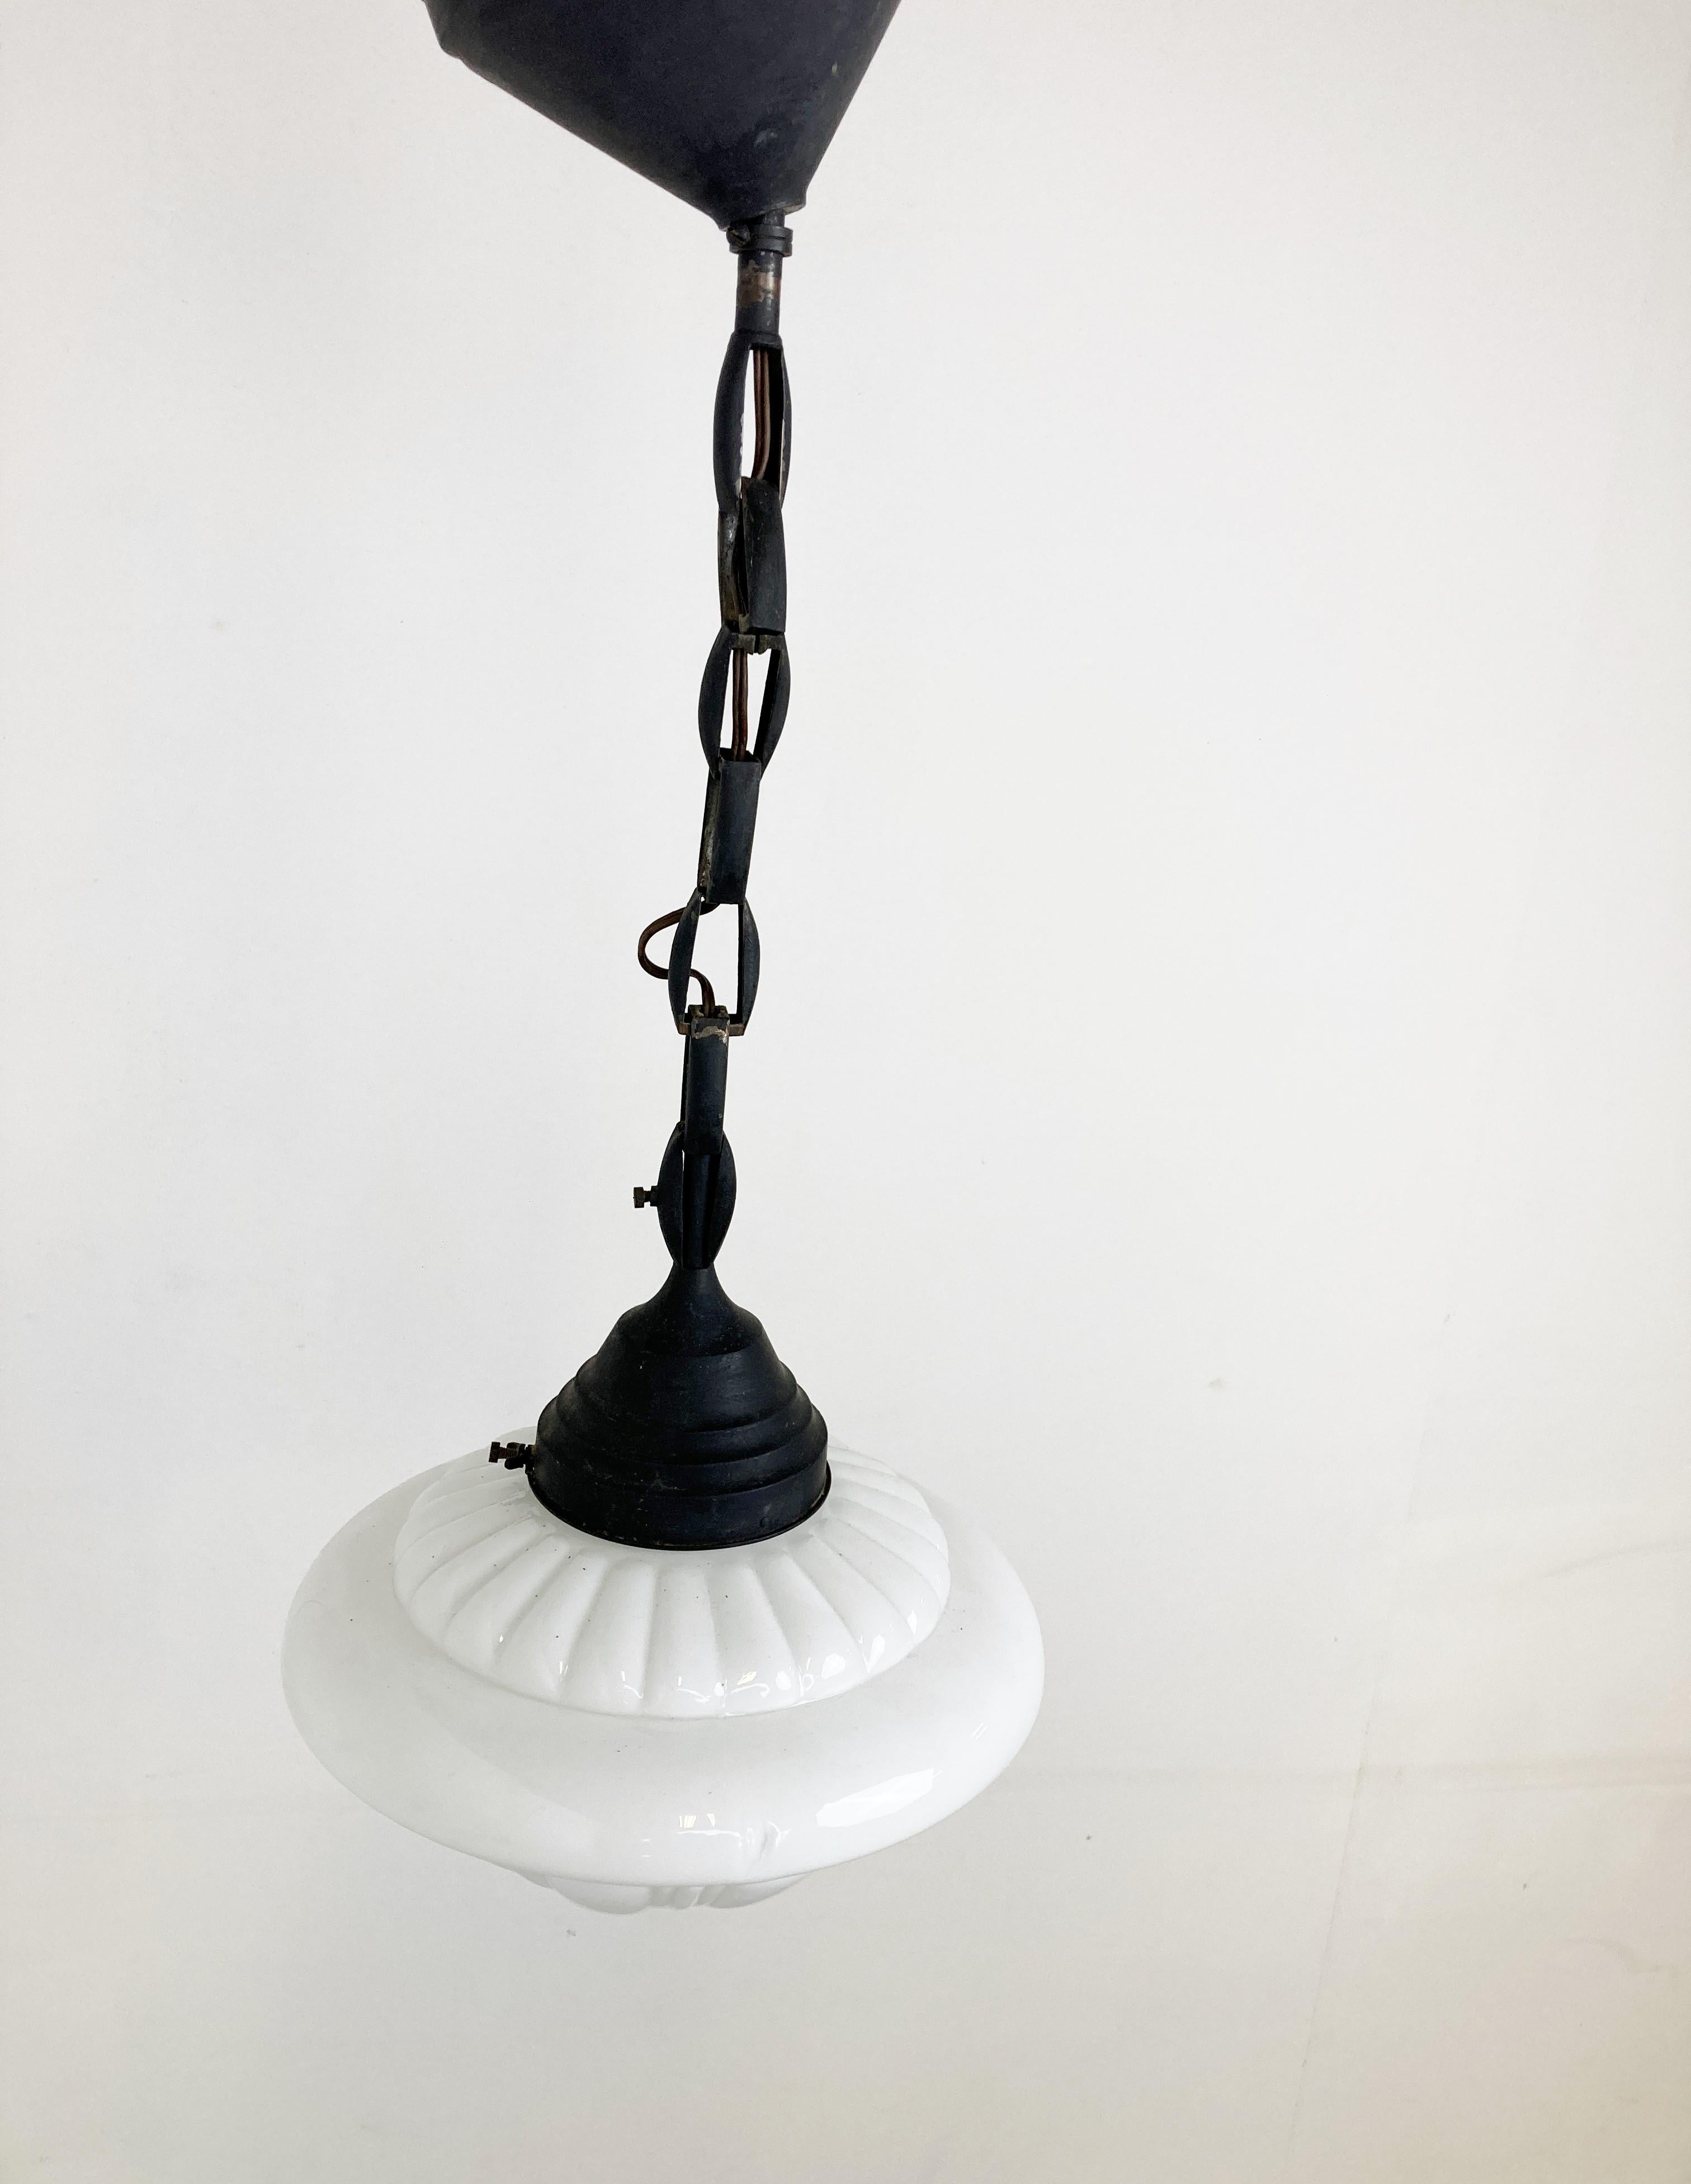 Antique art deco hallway pendant light.

This lamp is very typical for the art deco era and were widely used to be hung in hallways, offices or larger public places.

The lamp has the original copper chain and shade holder with ceiling